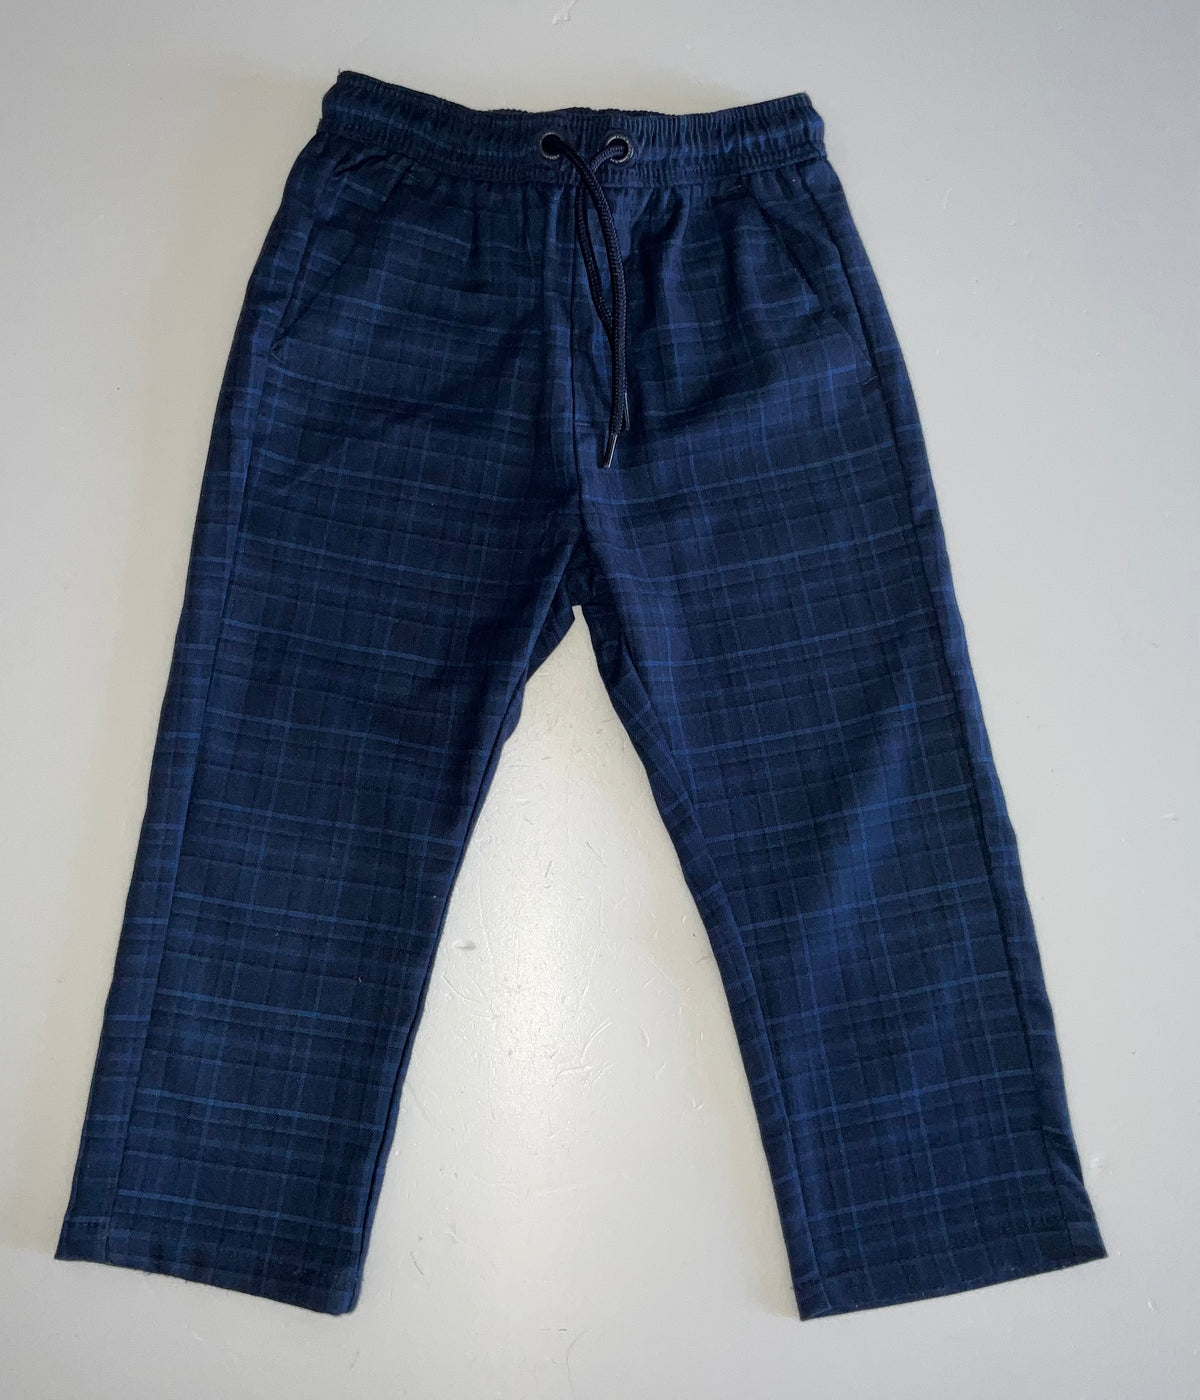 Next Trousers, Boys 18-24 Months